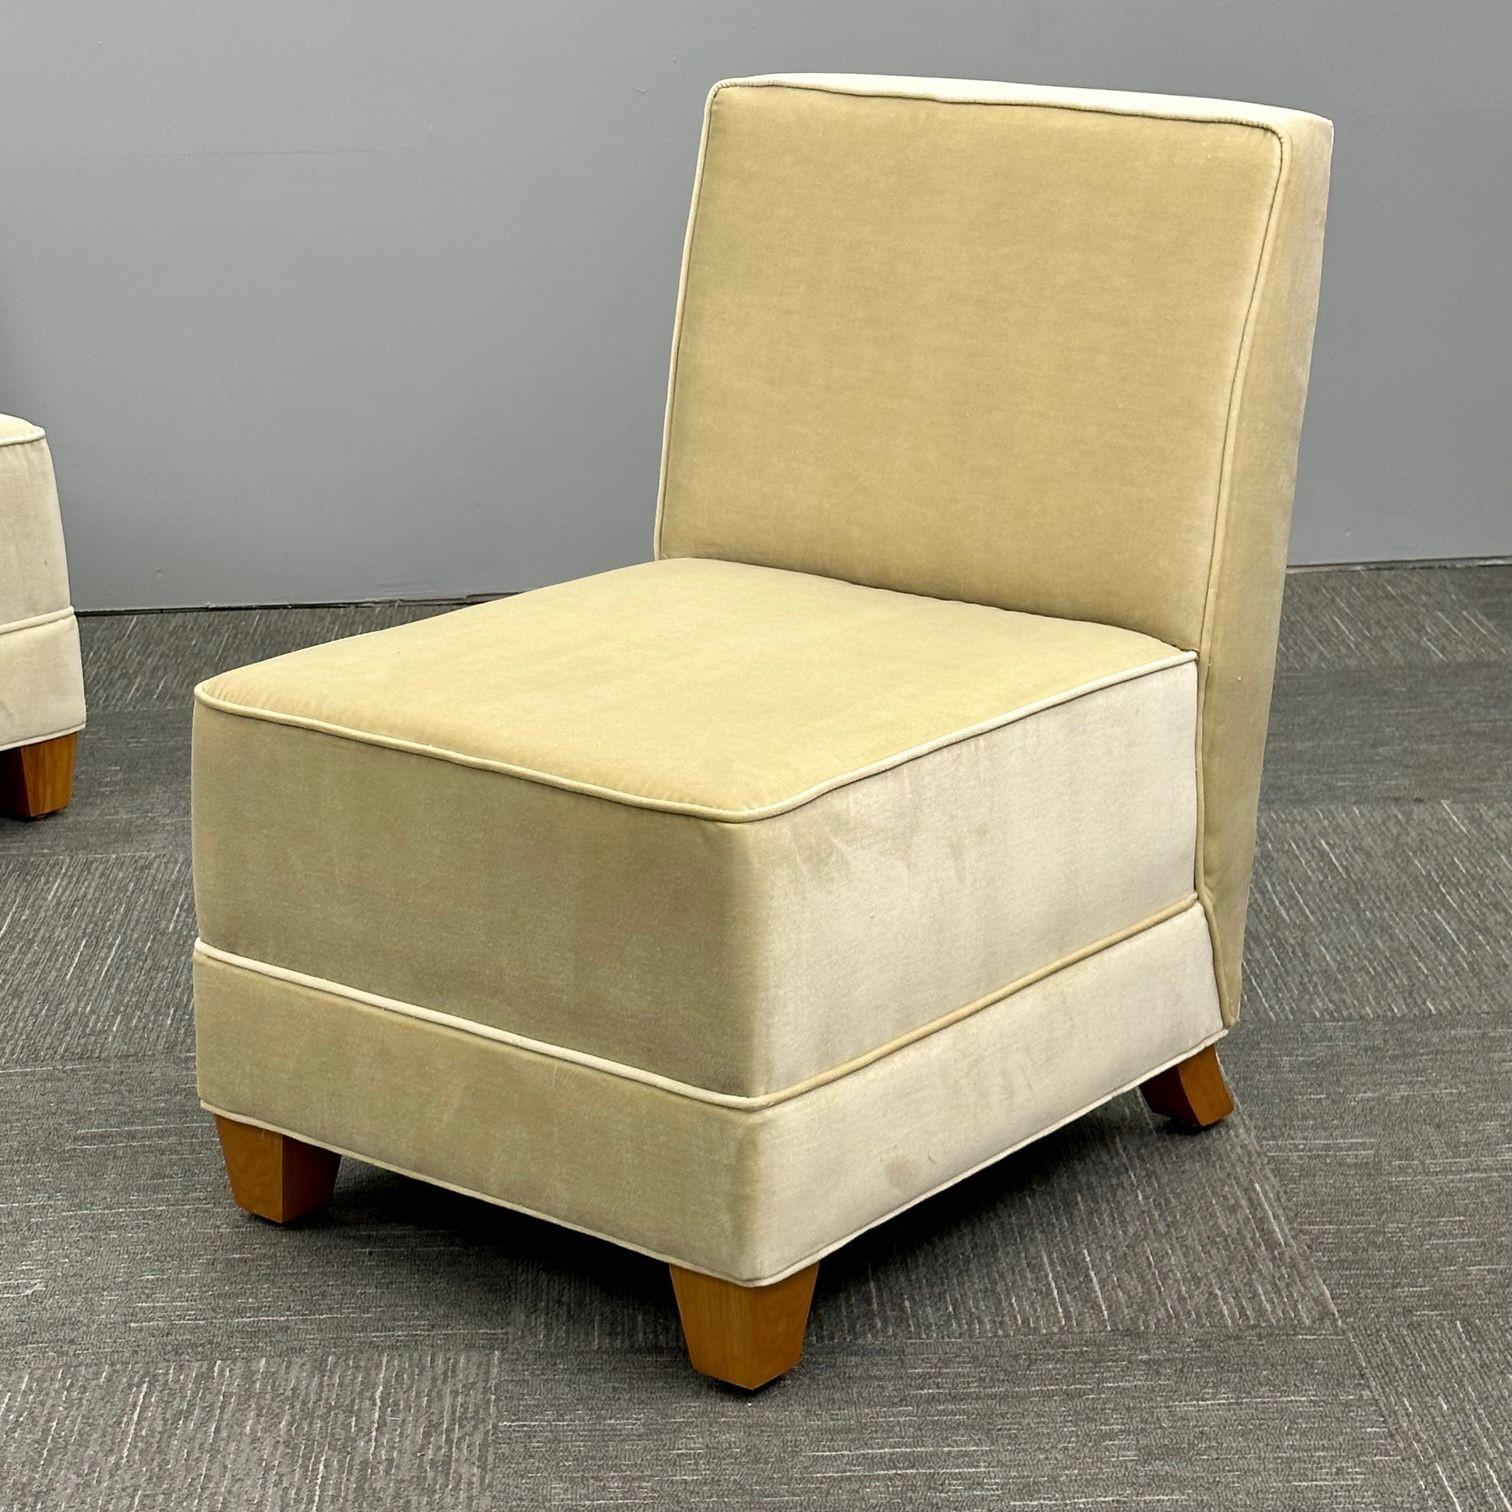 Pair Mid-Century Modern Jean-Michel Frank Style Lounge / Slipper Chairs, Mohair In Good Condition For Sale In Stamford, CT